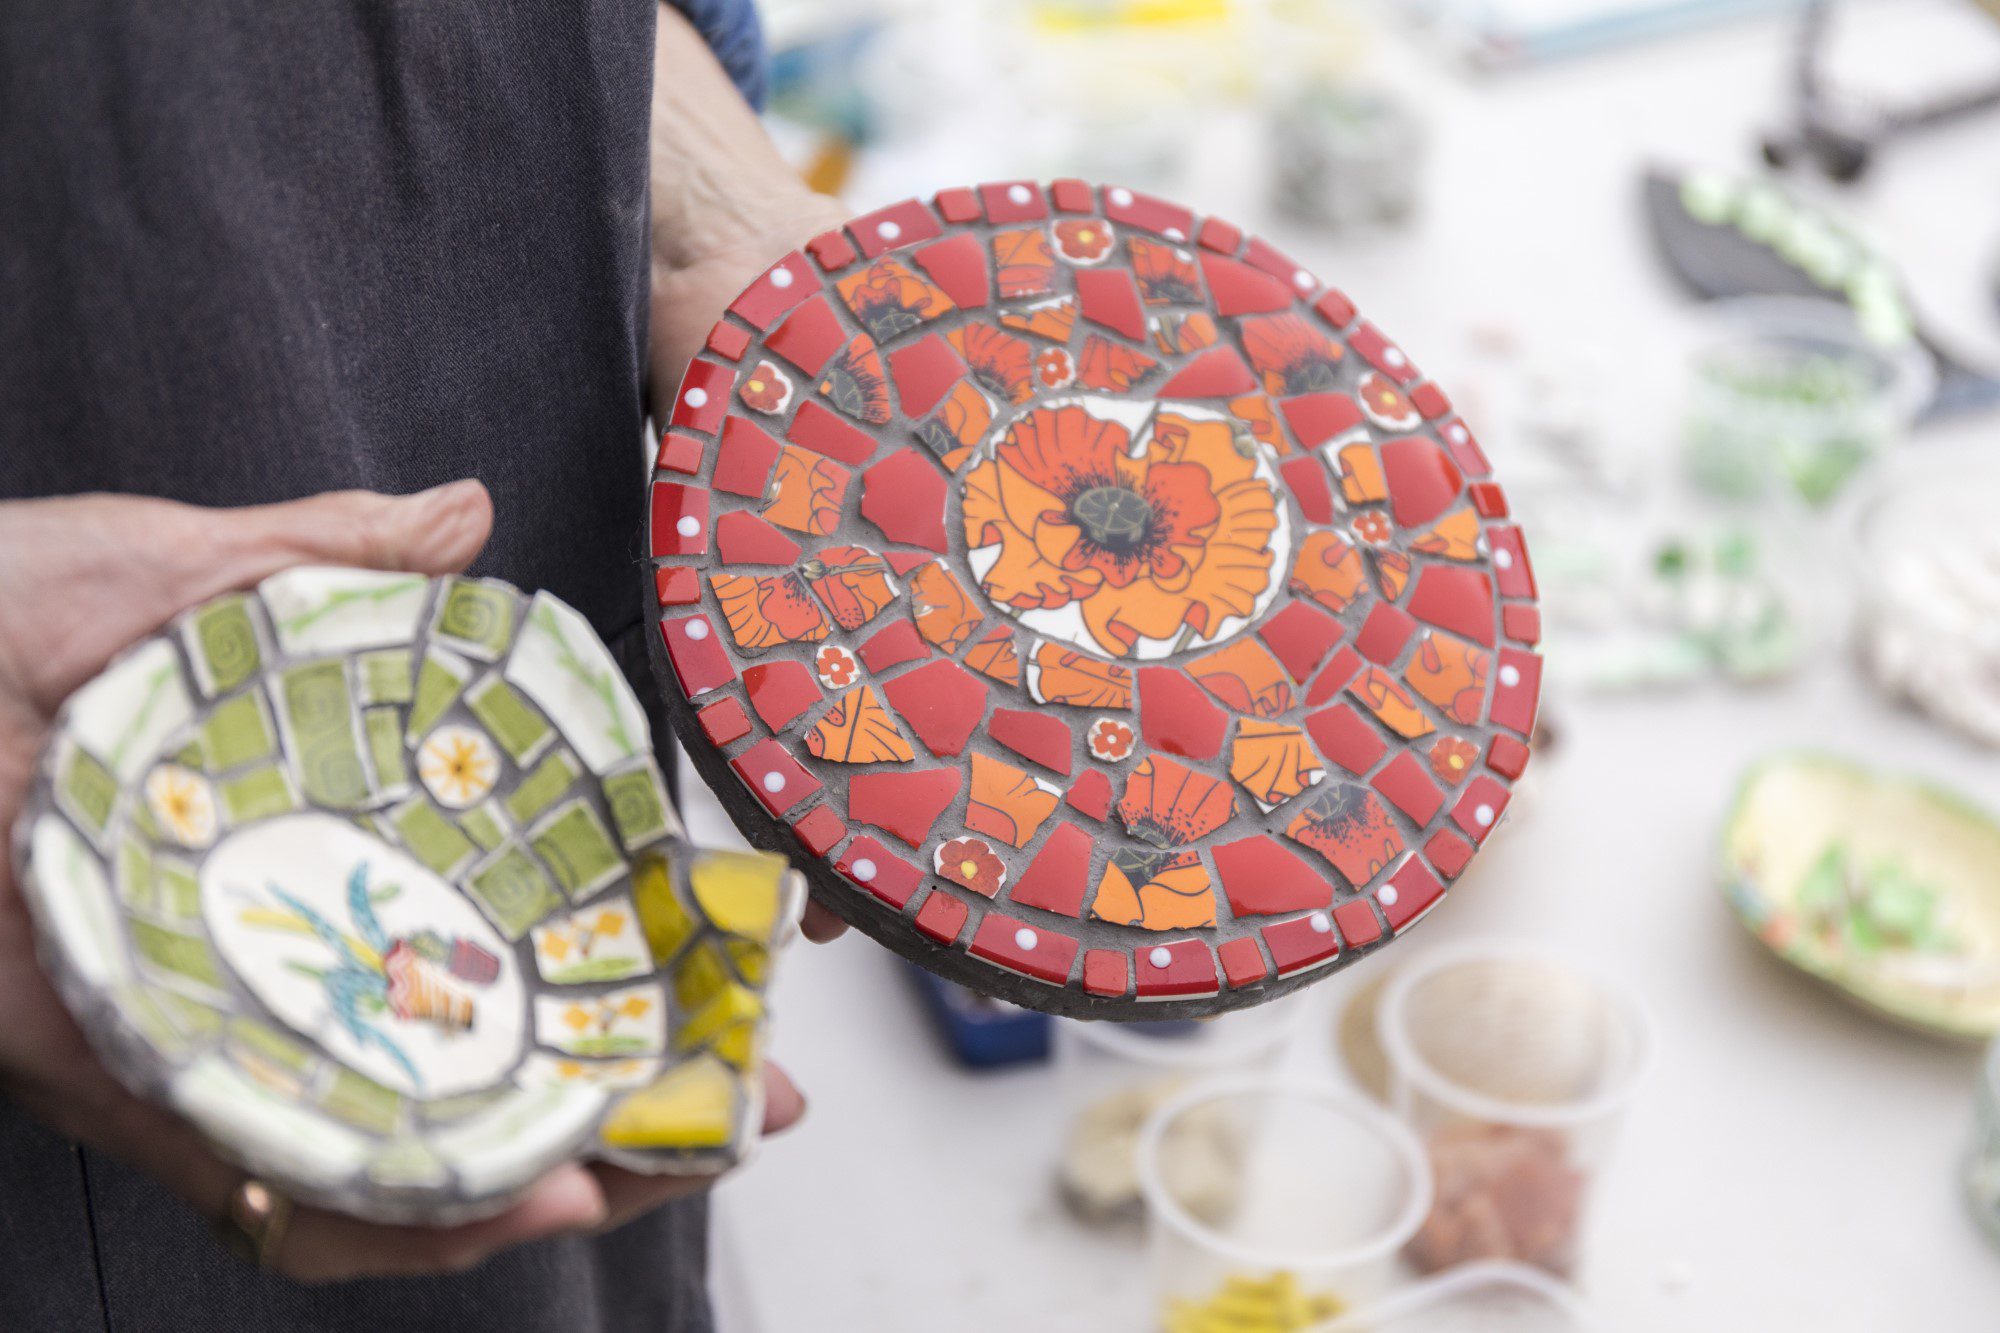 Close-up person holding two handmade mosaic tiles. One is red and orange, the other white and green.